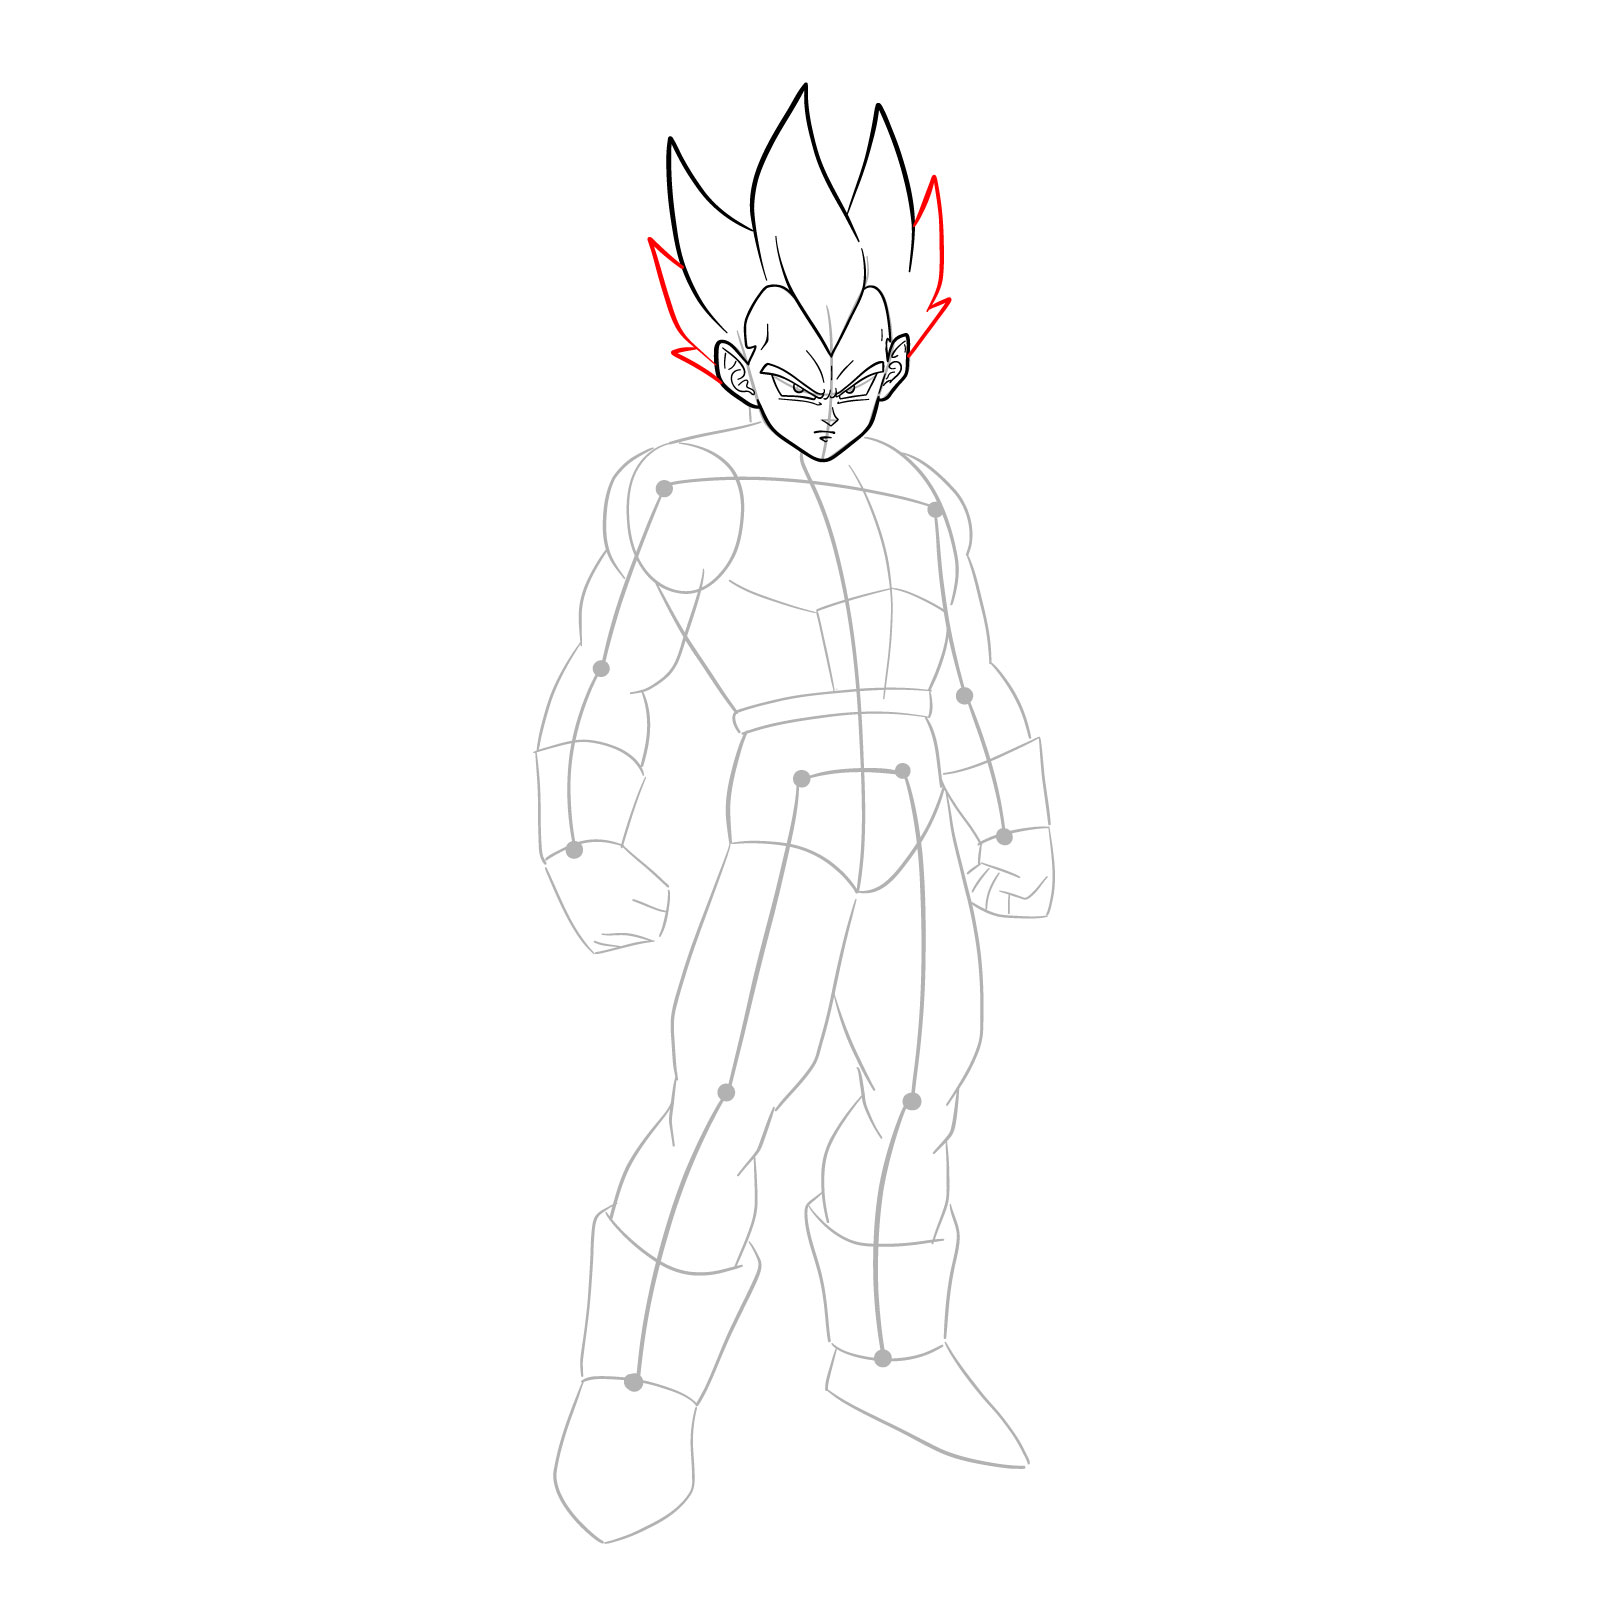 How to draw Vegeta in SSGSS - step 15